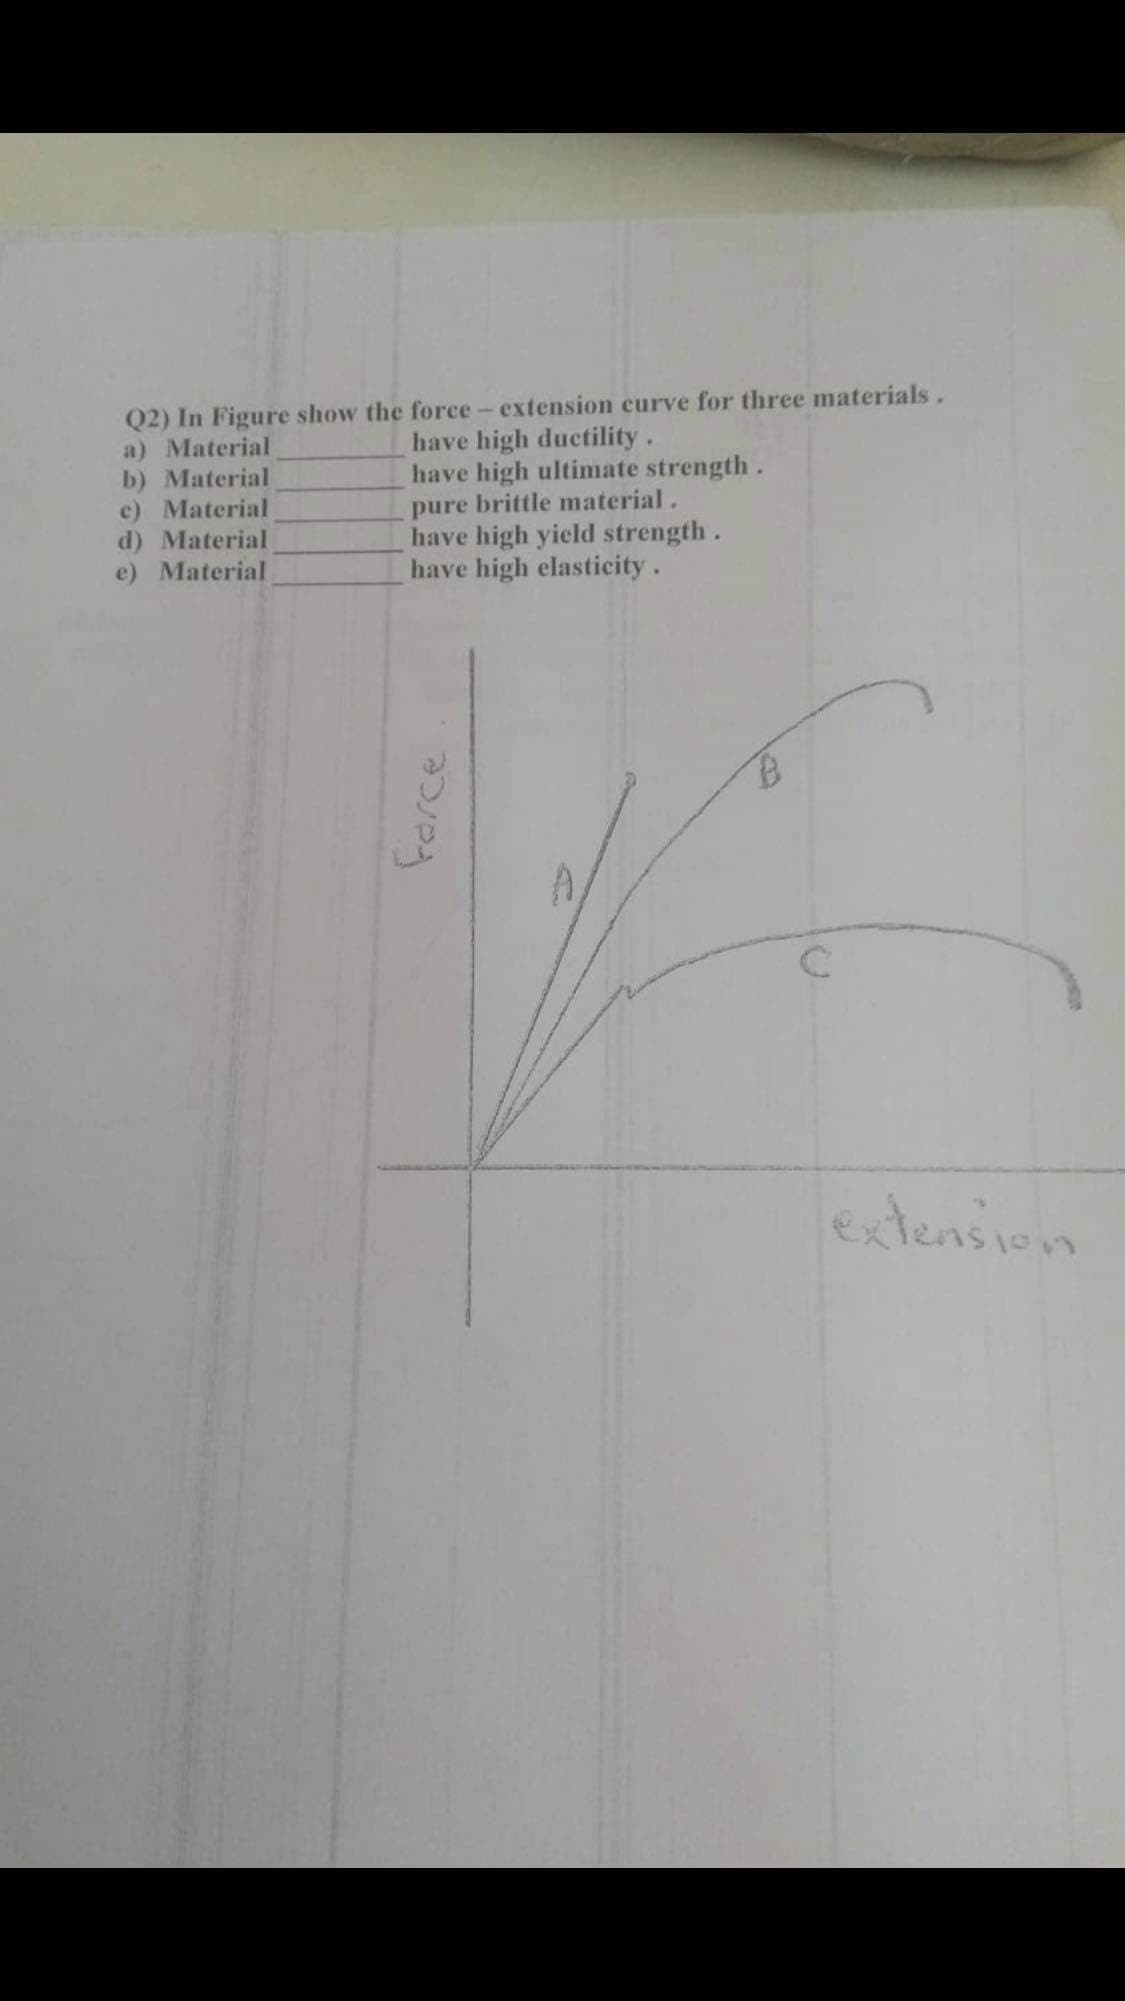 Q2) In Figure show the force- extension curve for three materials.
a) Material
b) Material
c) Material
d) Material
e) Material
have high ductility.
have high ultimate strength.
pure brittle material.
have high yield strength.
have high elasticity.
extension
Farce
